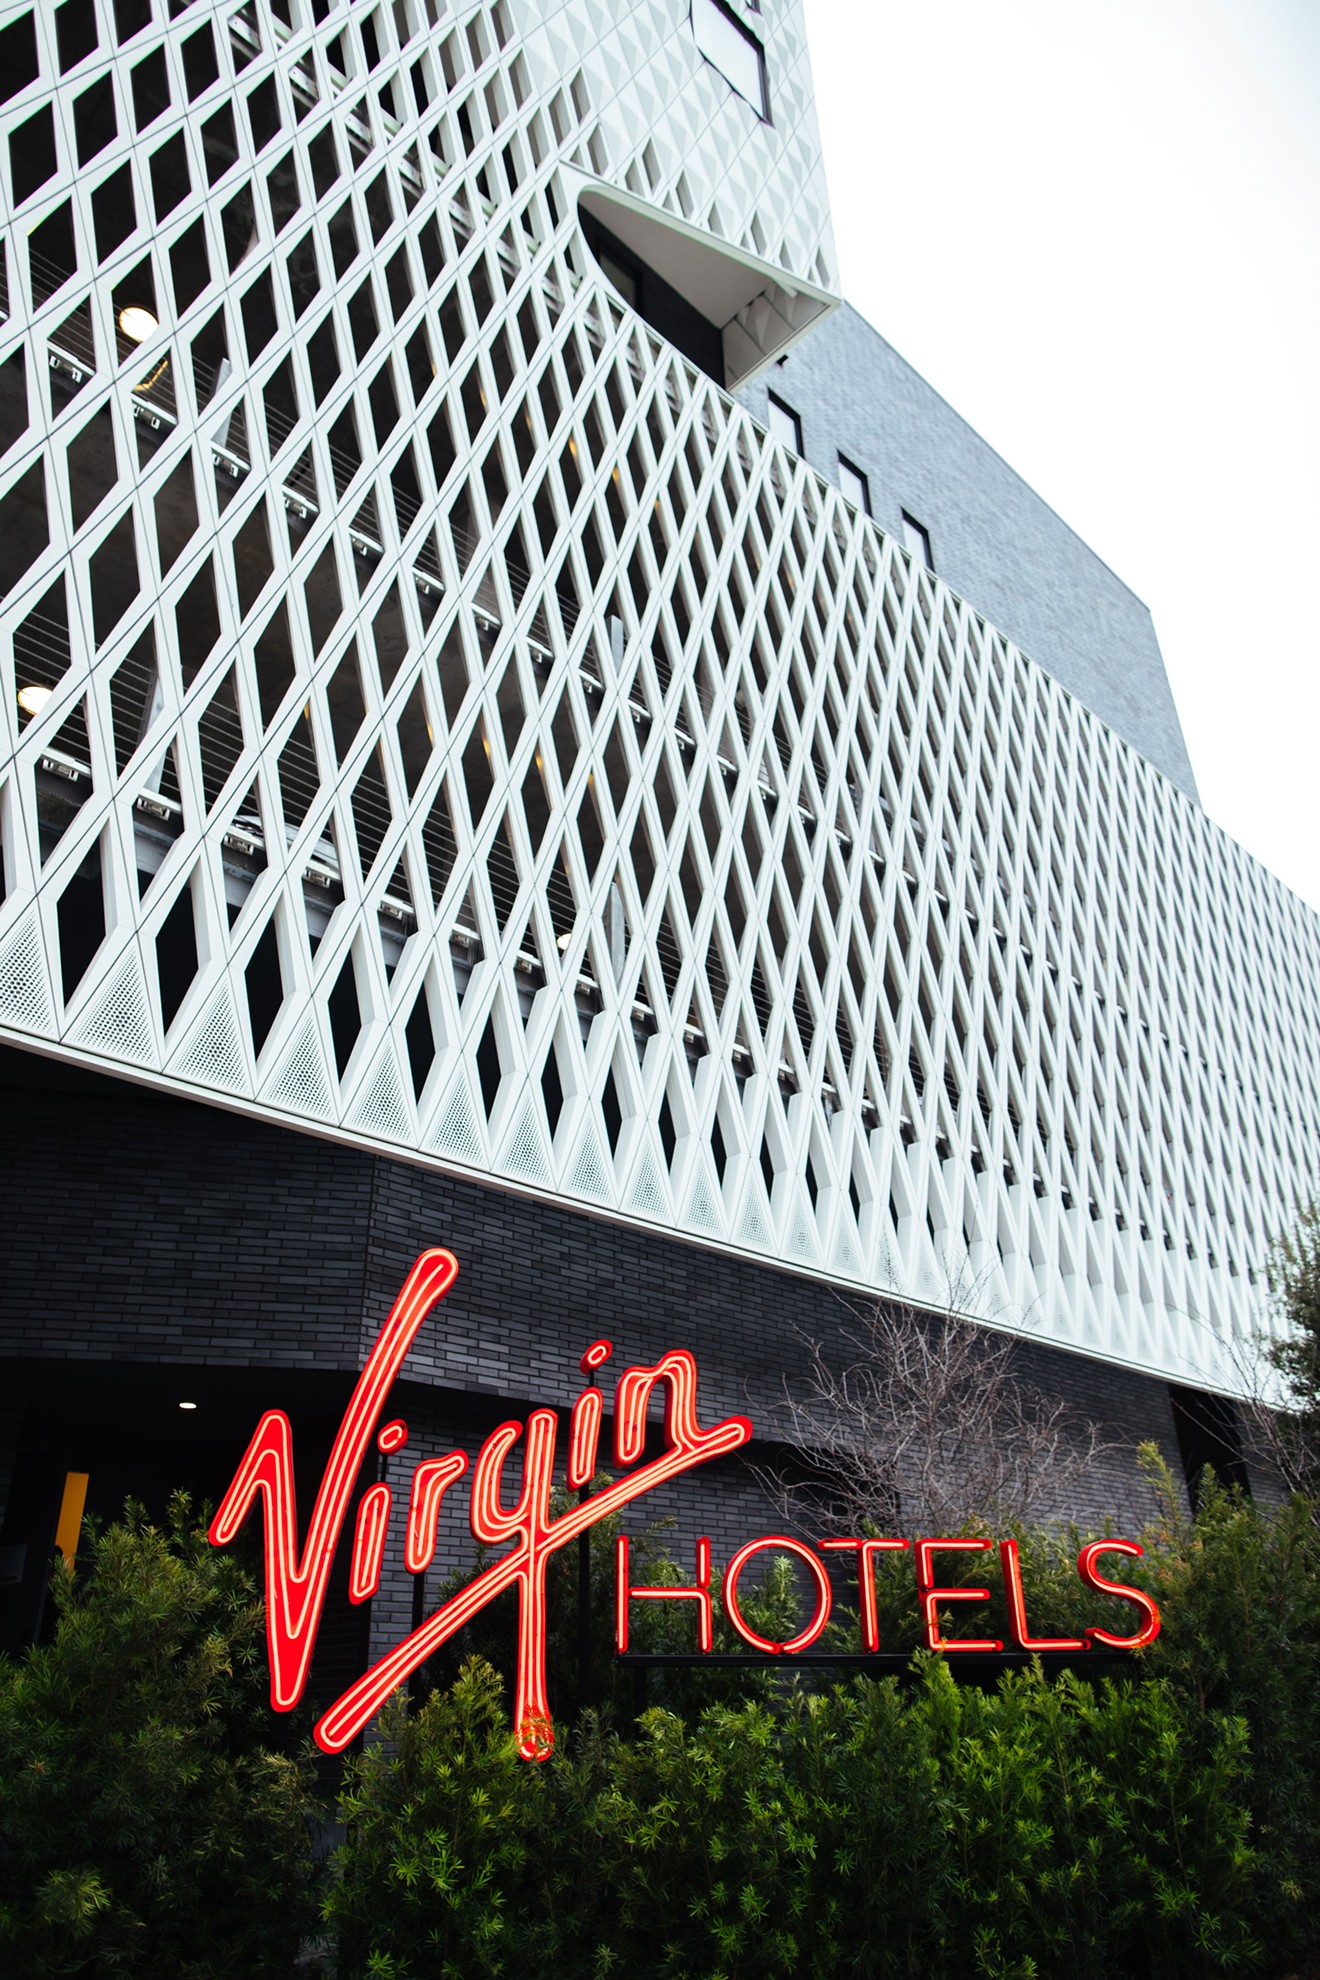 Local DJs say they were discriminated against by Virgin Hotels Dallas because of the crowds they draw at their performances.